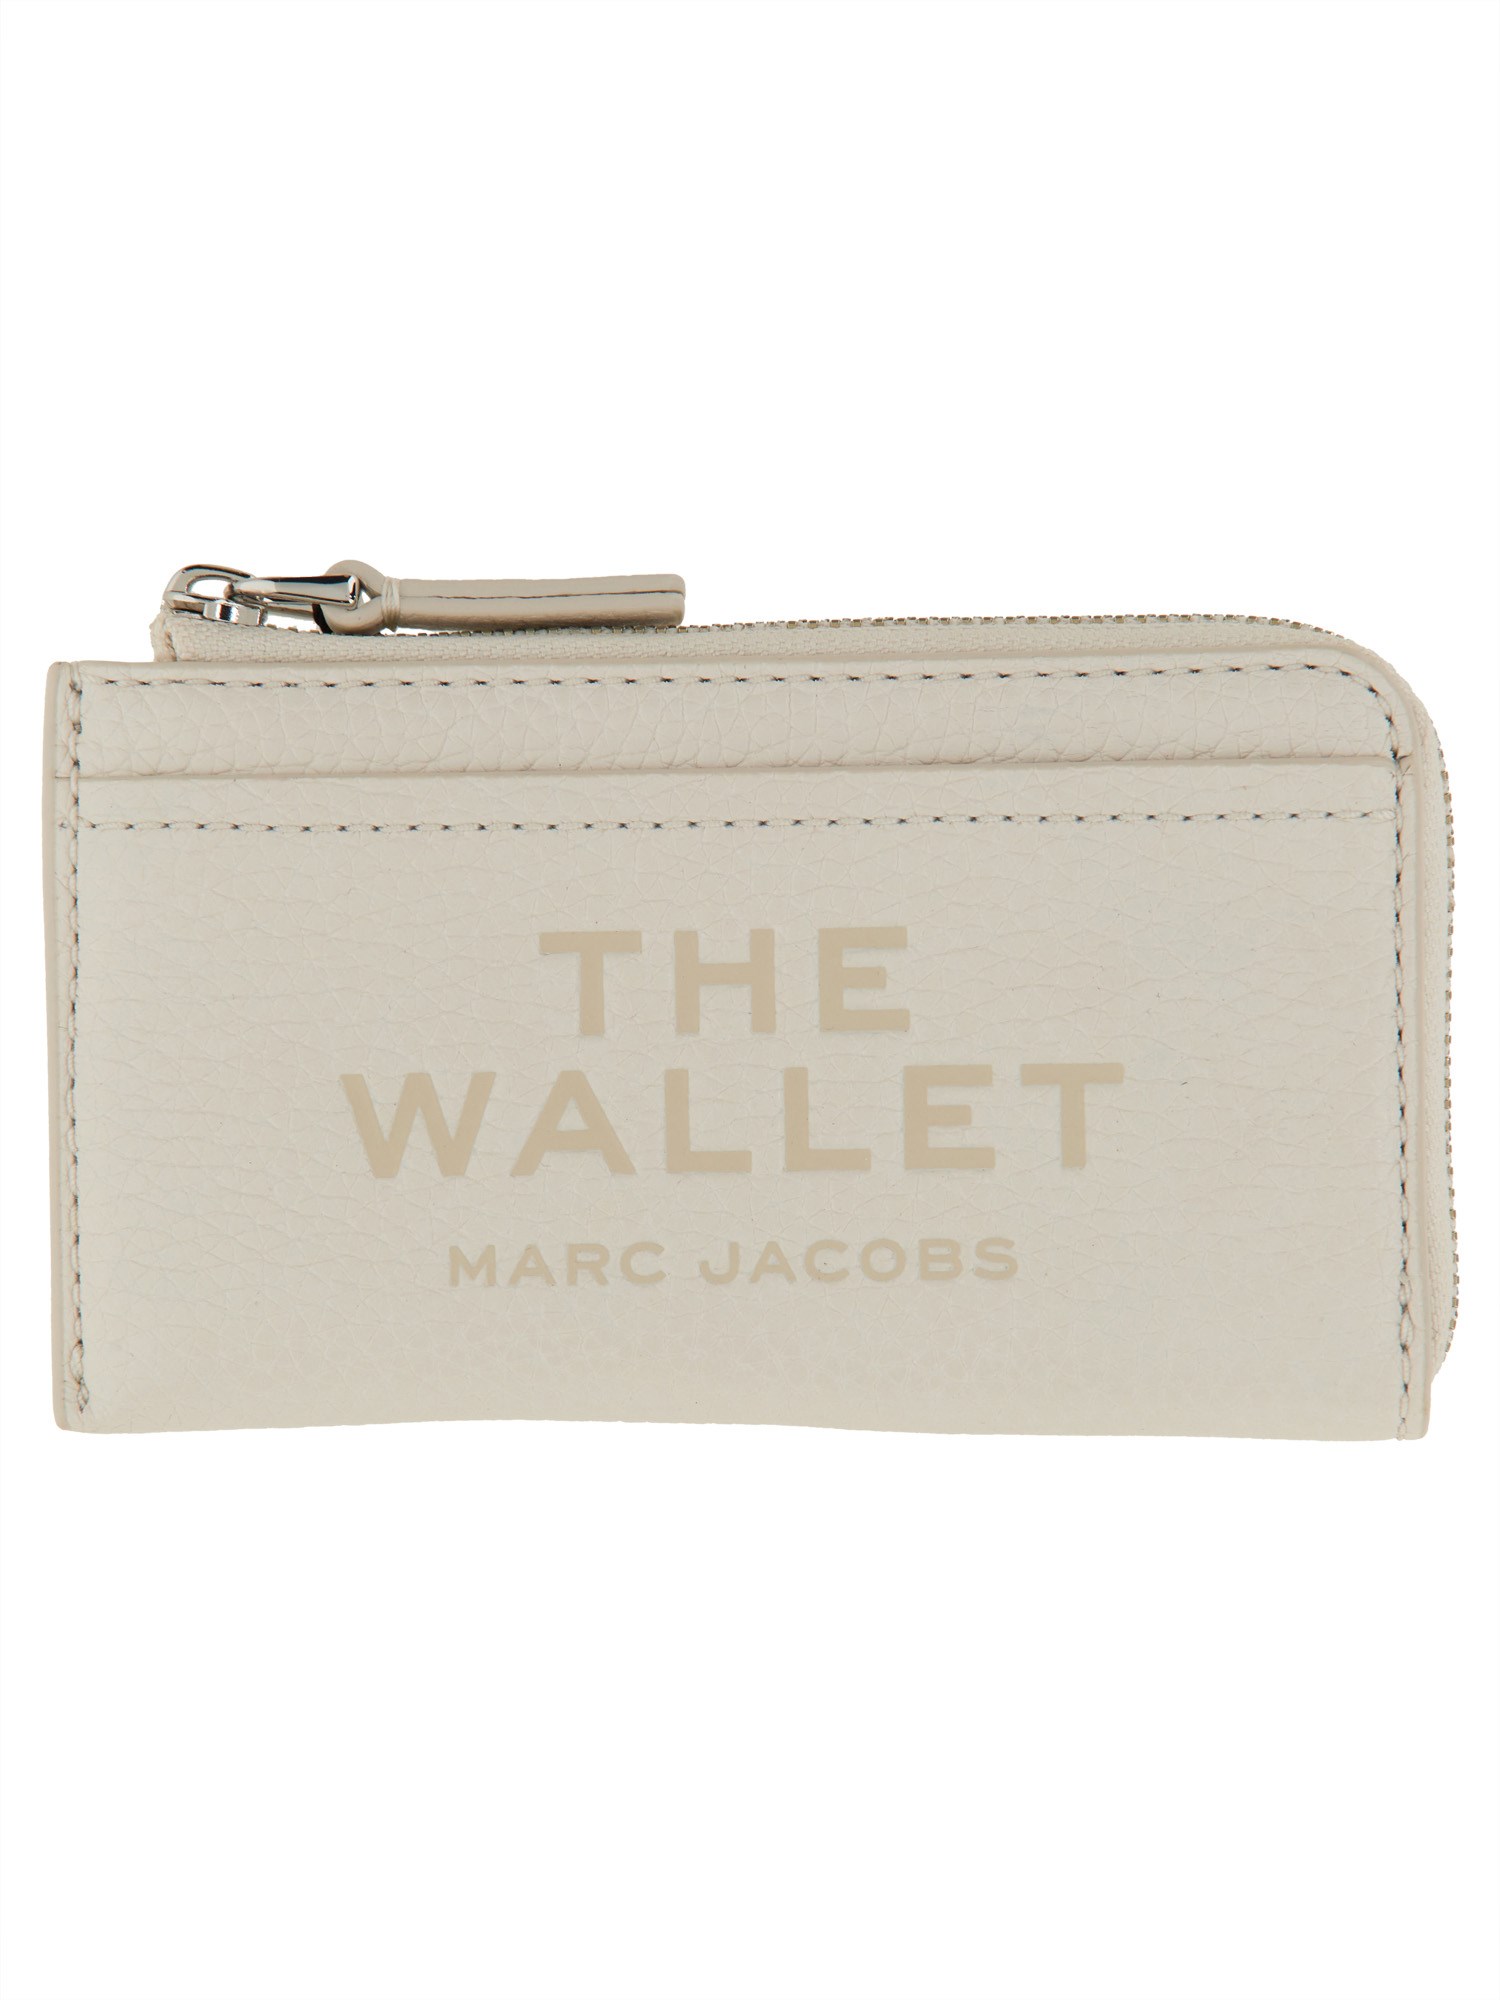 Marc Jacobs marc jacobs leather card holder